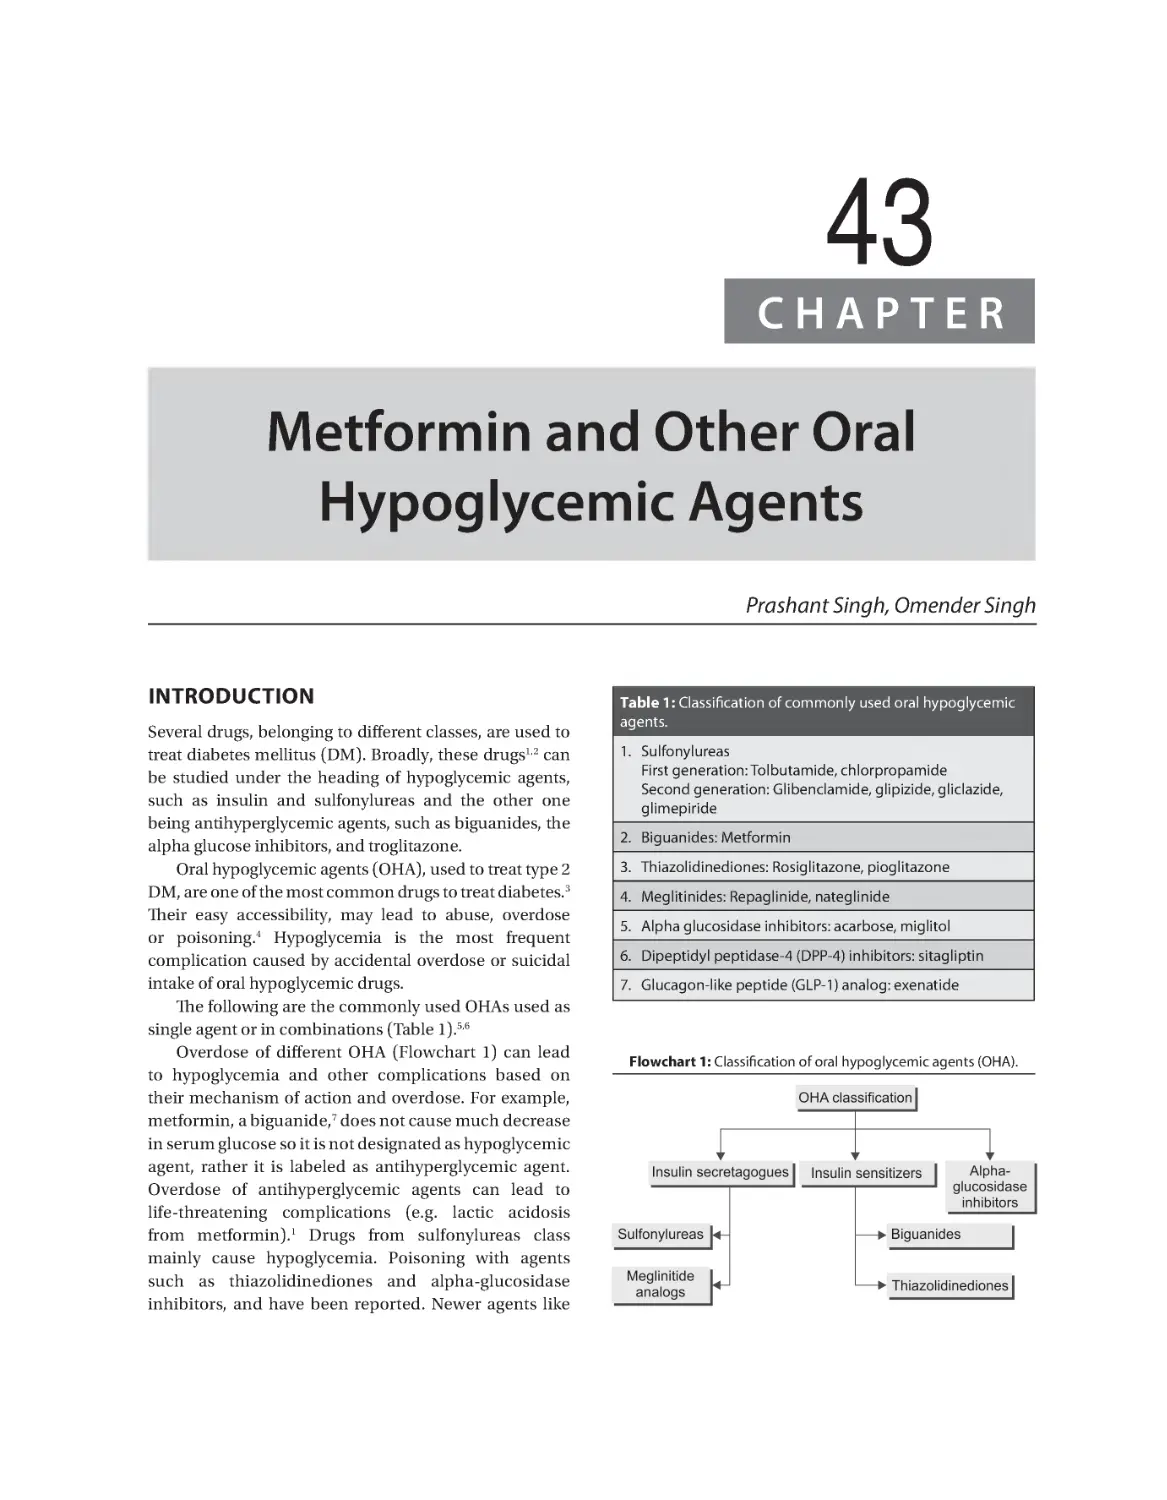 Chapter 43: Metformin and Other Oral Hypoglycemic Agents